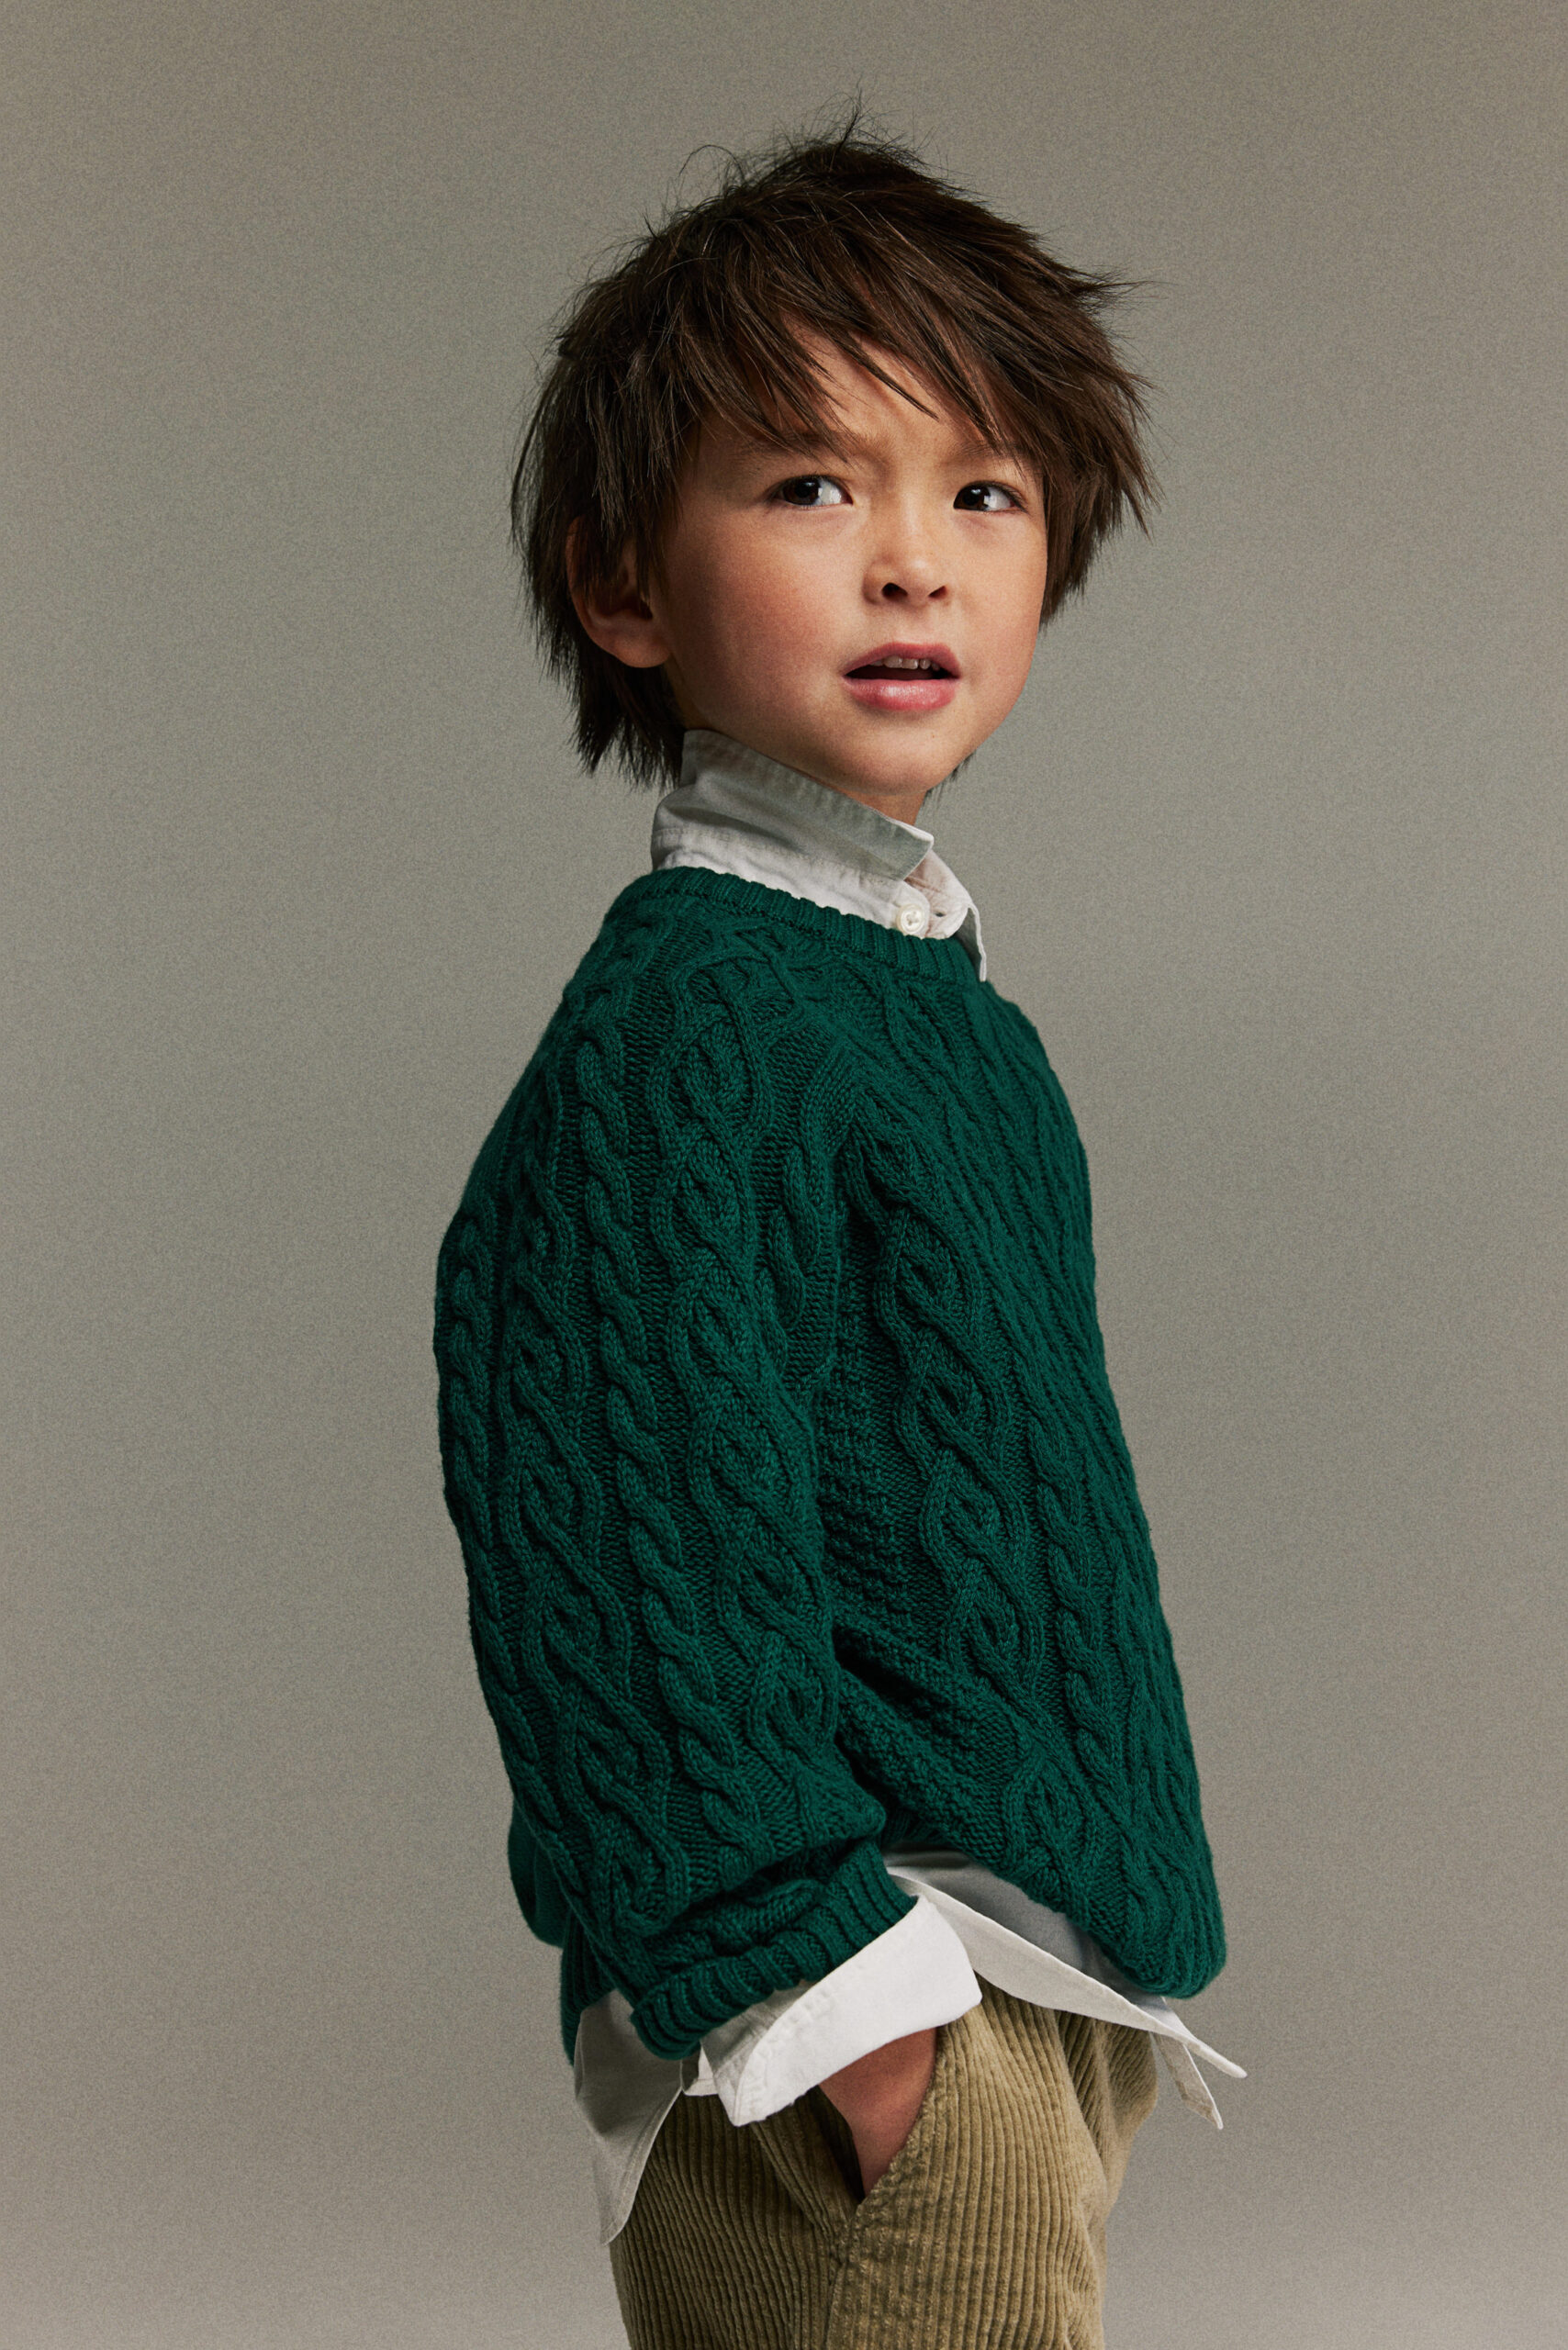 a child in a green cable knit sweater